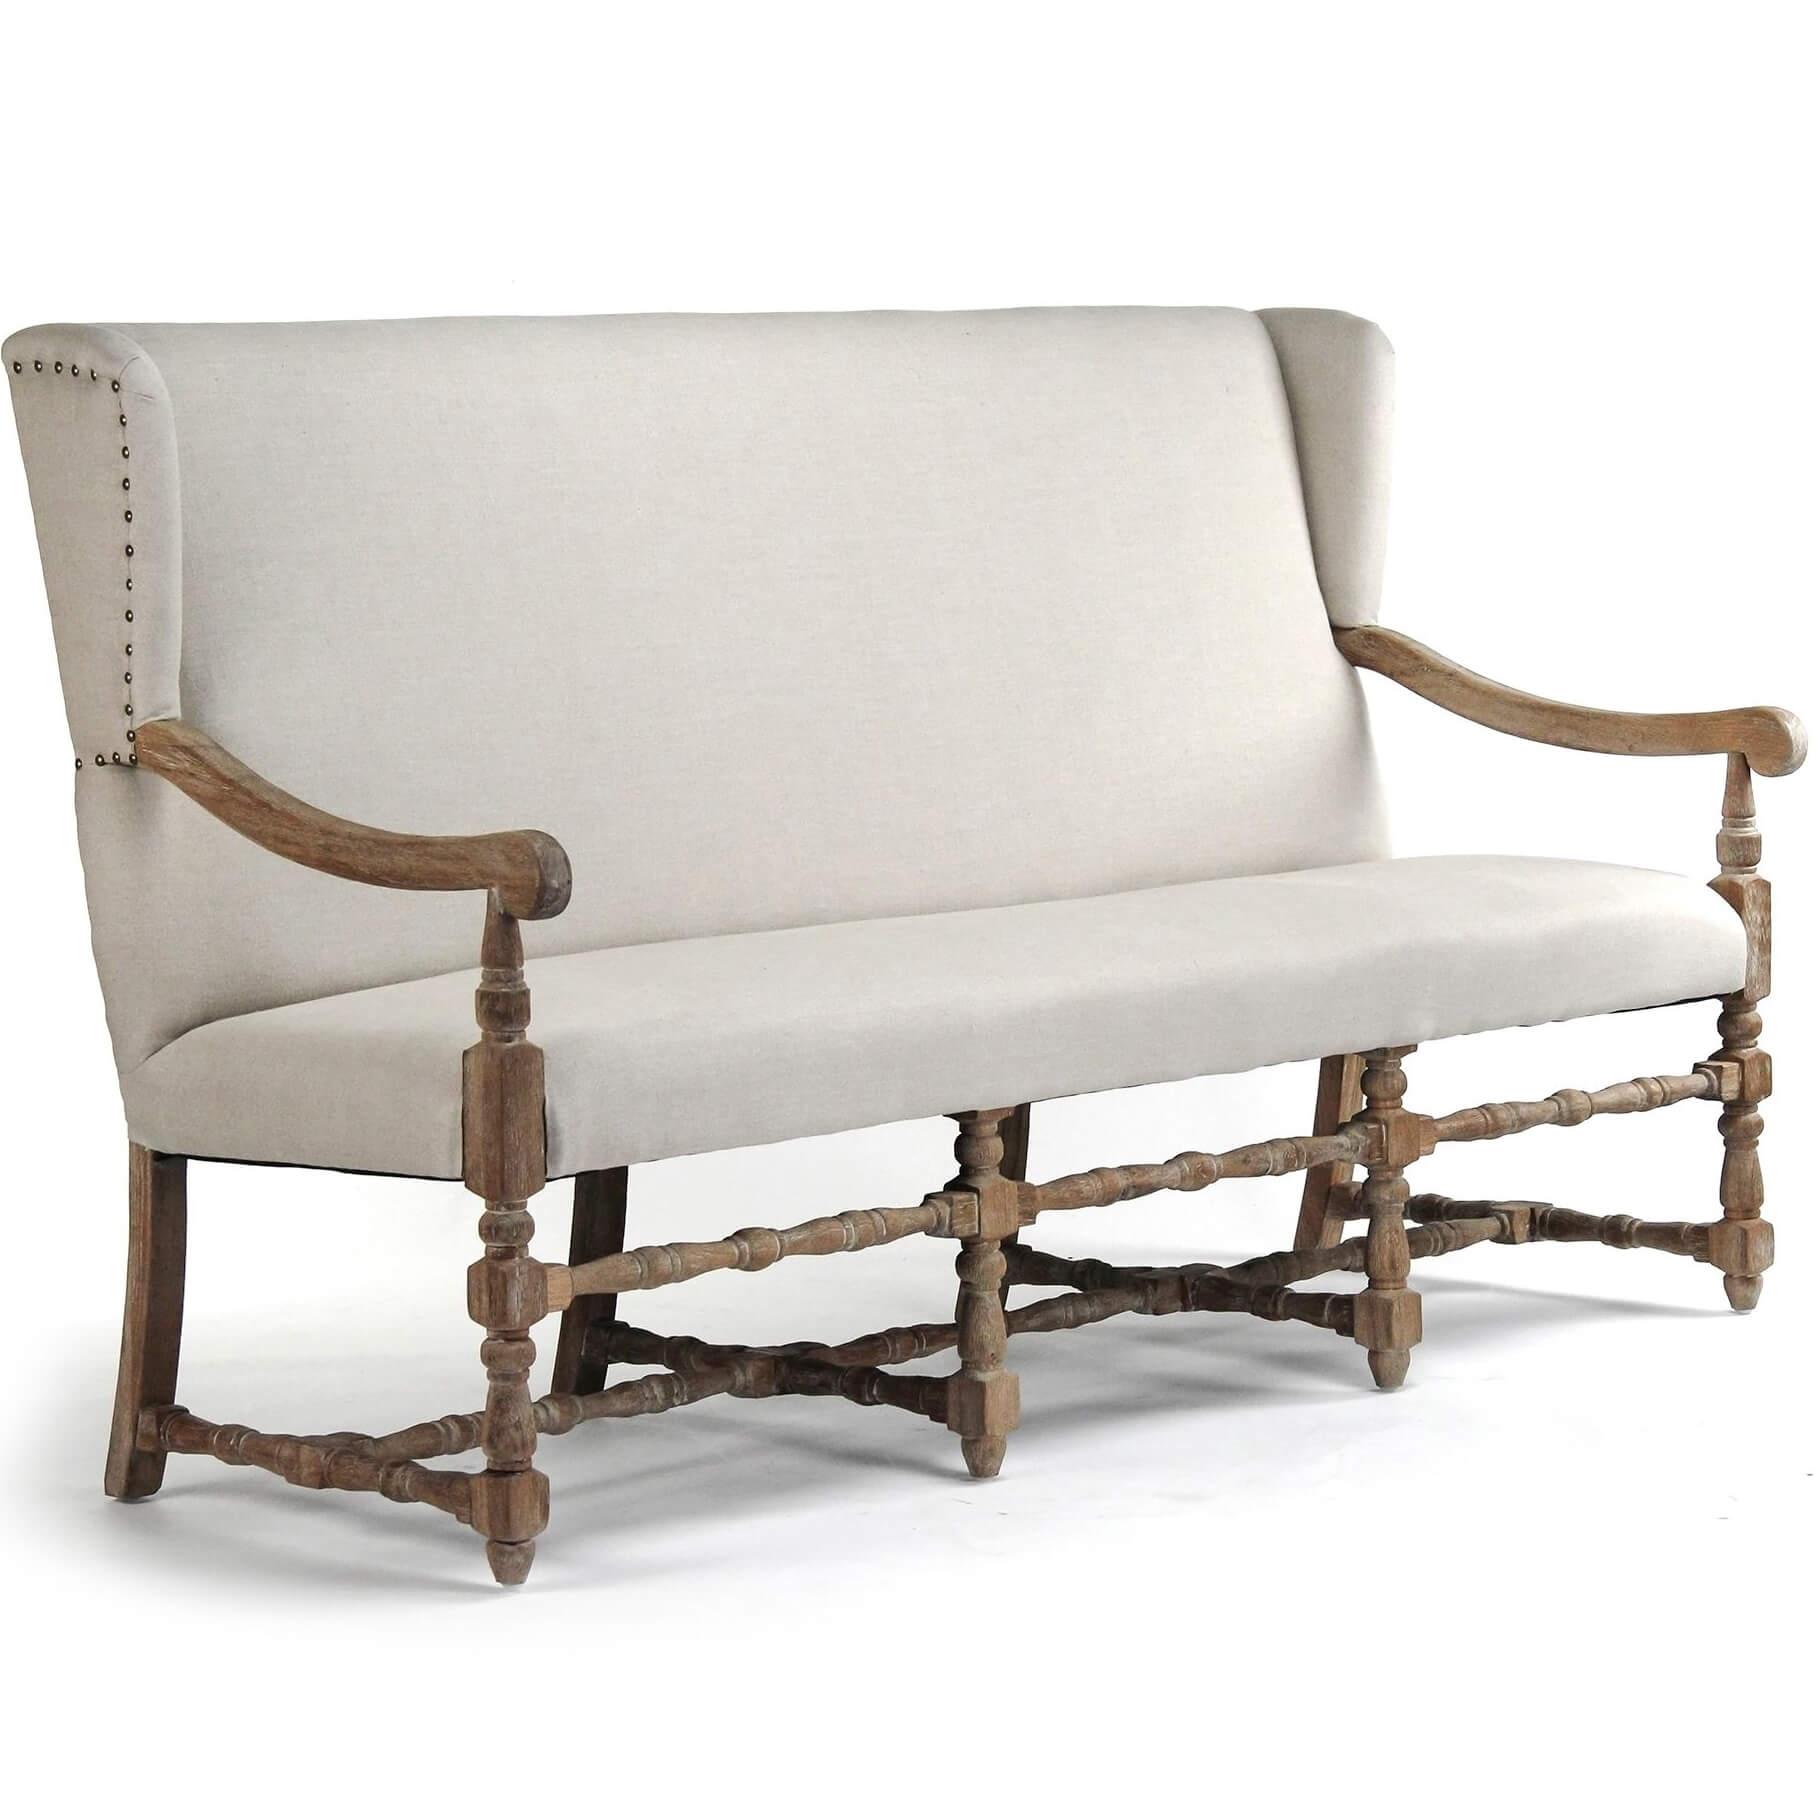 Provence Chic High Back Bench - Belle Escape